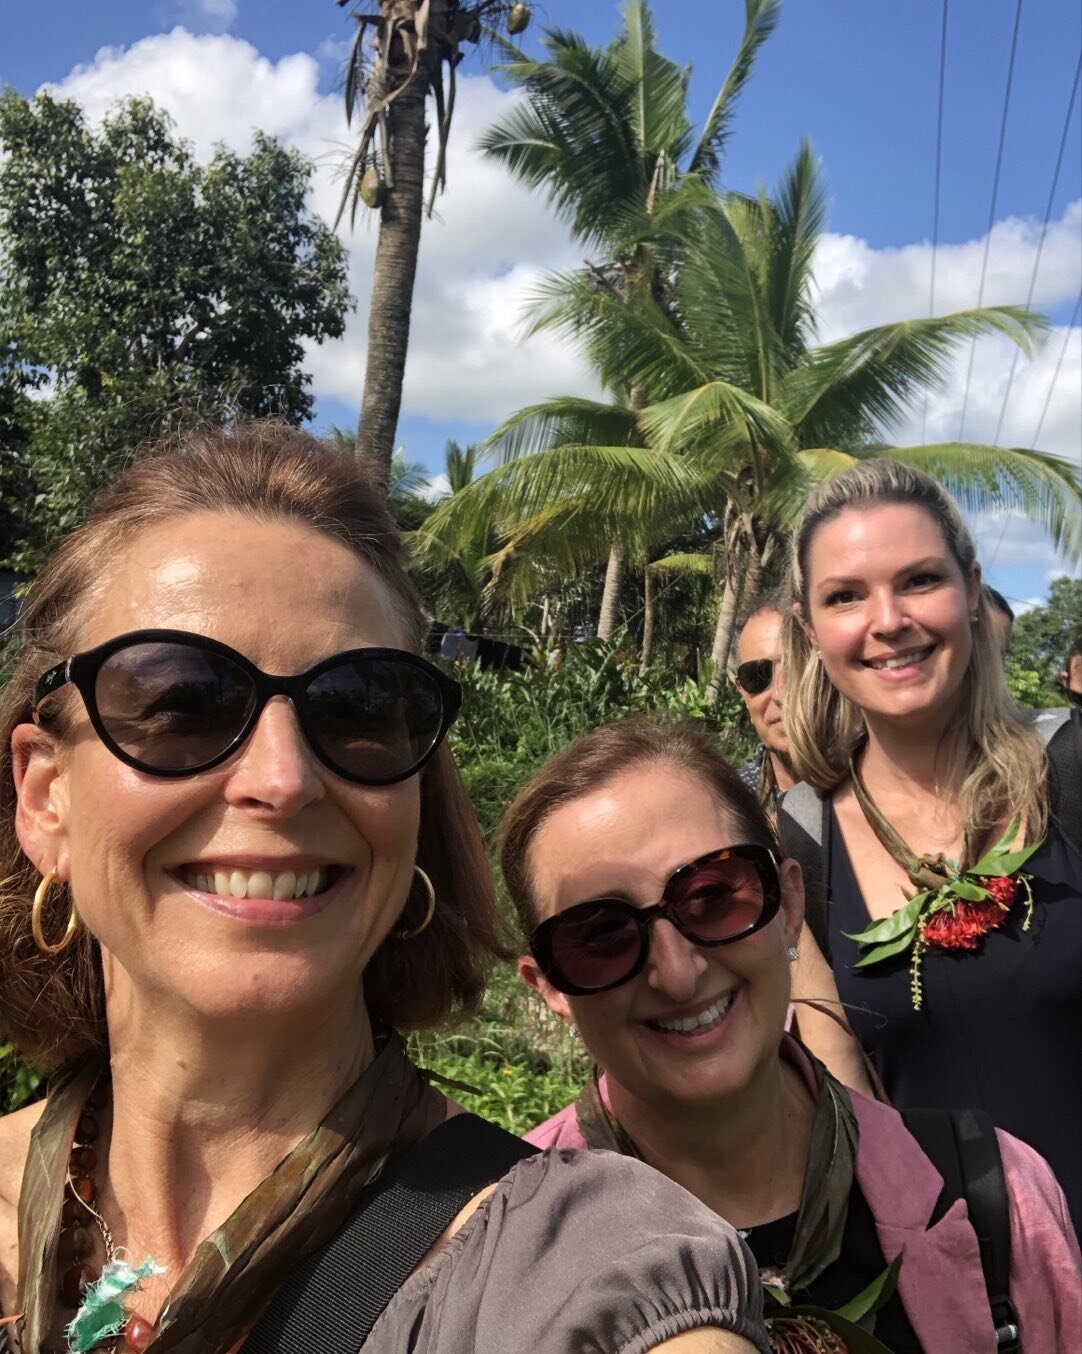 We made it!! Not one person tumbled into the wild, croc infested, rushing river below!! 😃🤣 (well&hellip; perhaps not croc 🐊 infested.. and not exactly wild. Rather more of a piddling stream!!) @savechildrenaus